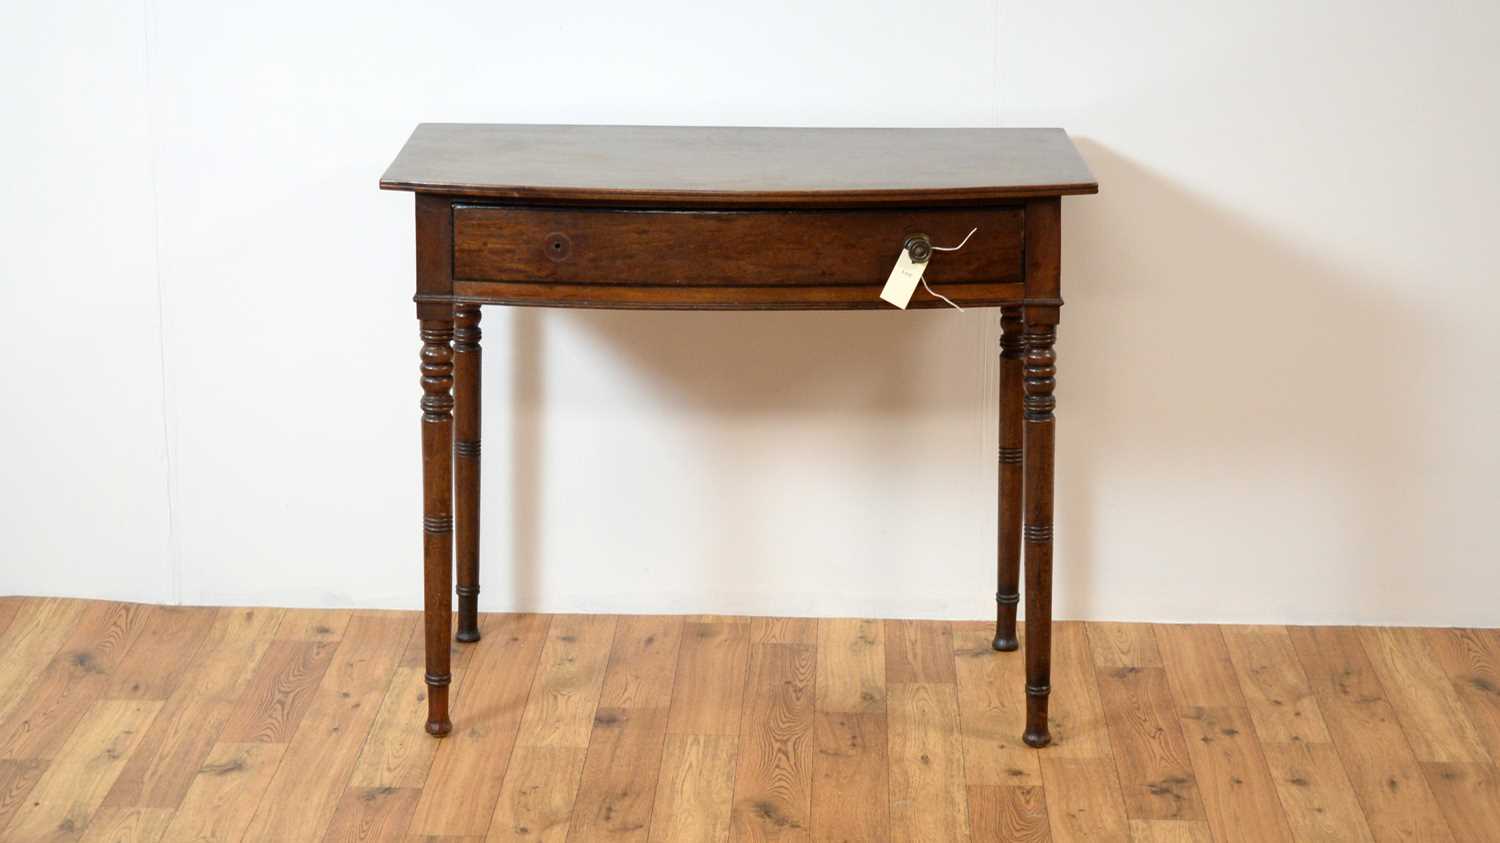 A 19th century bowfront side / hall table